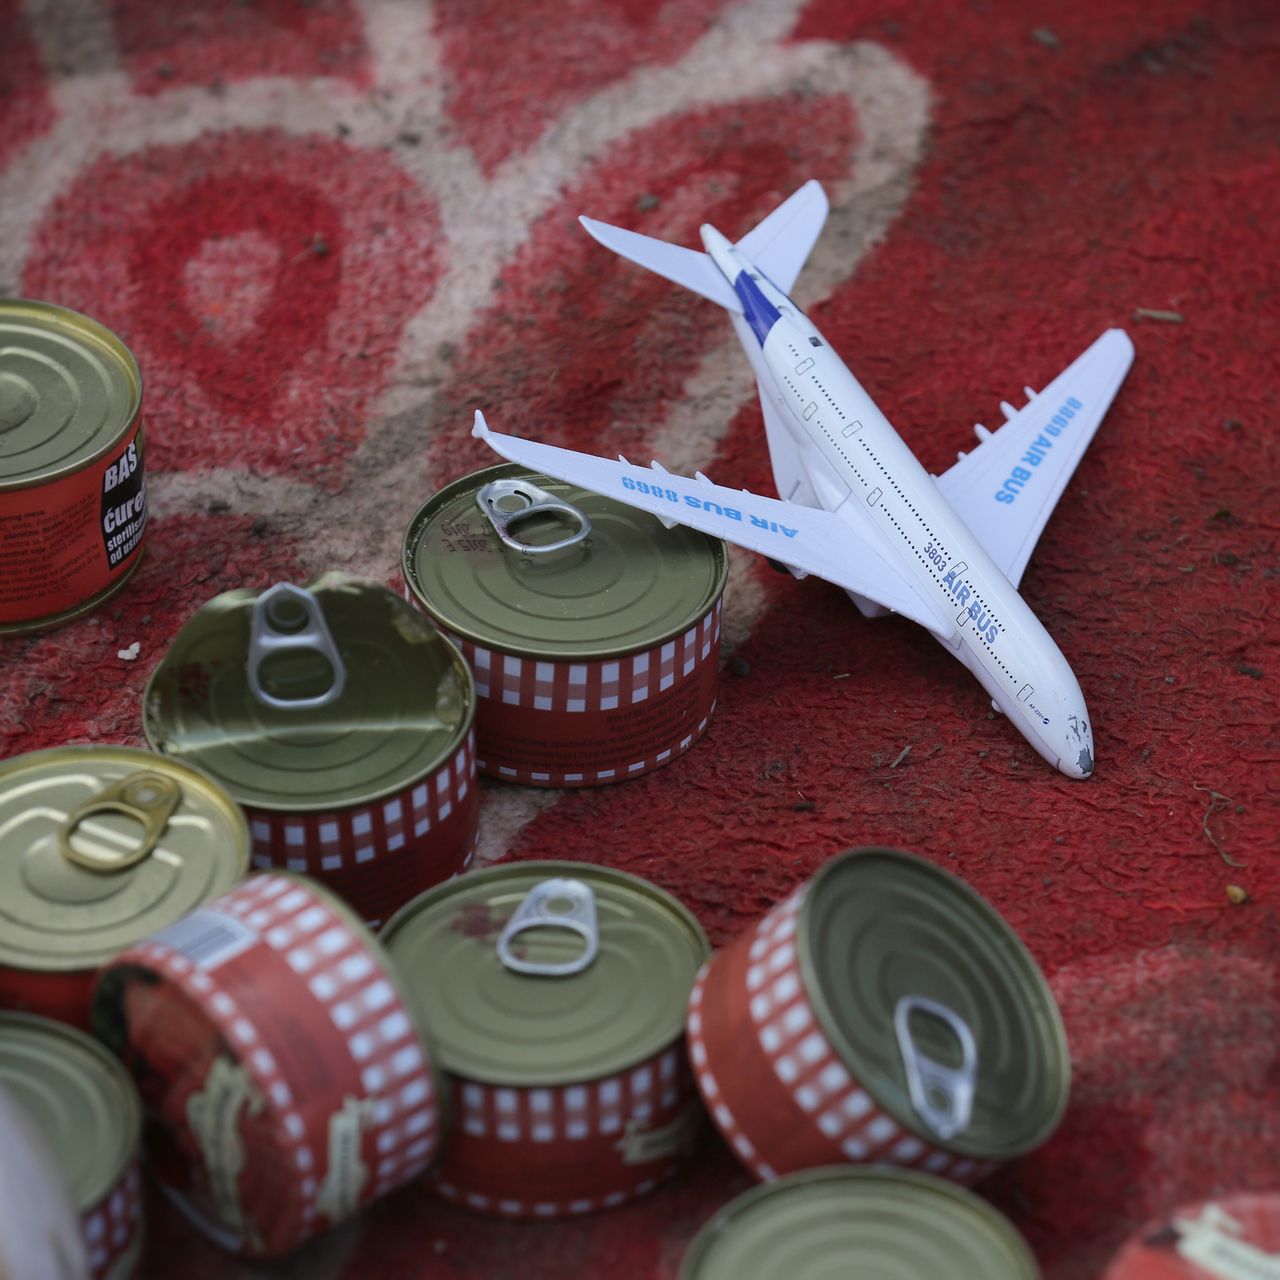 A toy aircraft and cans of food.